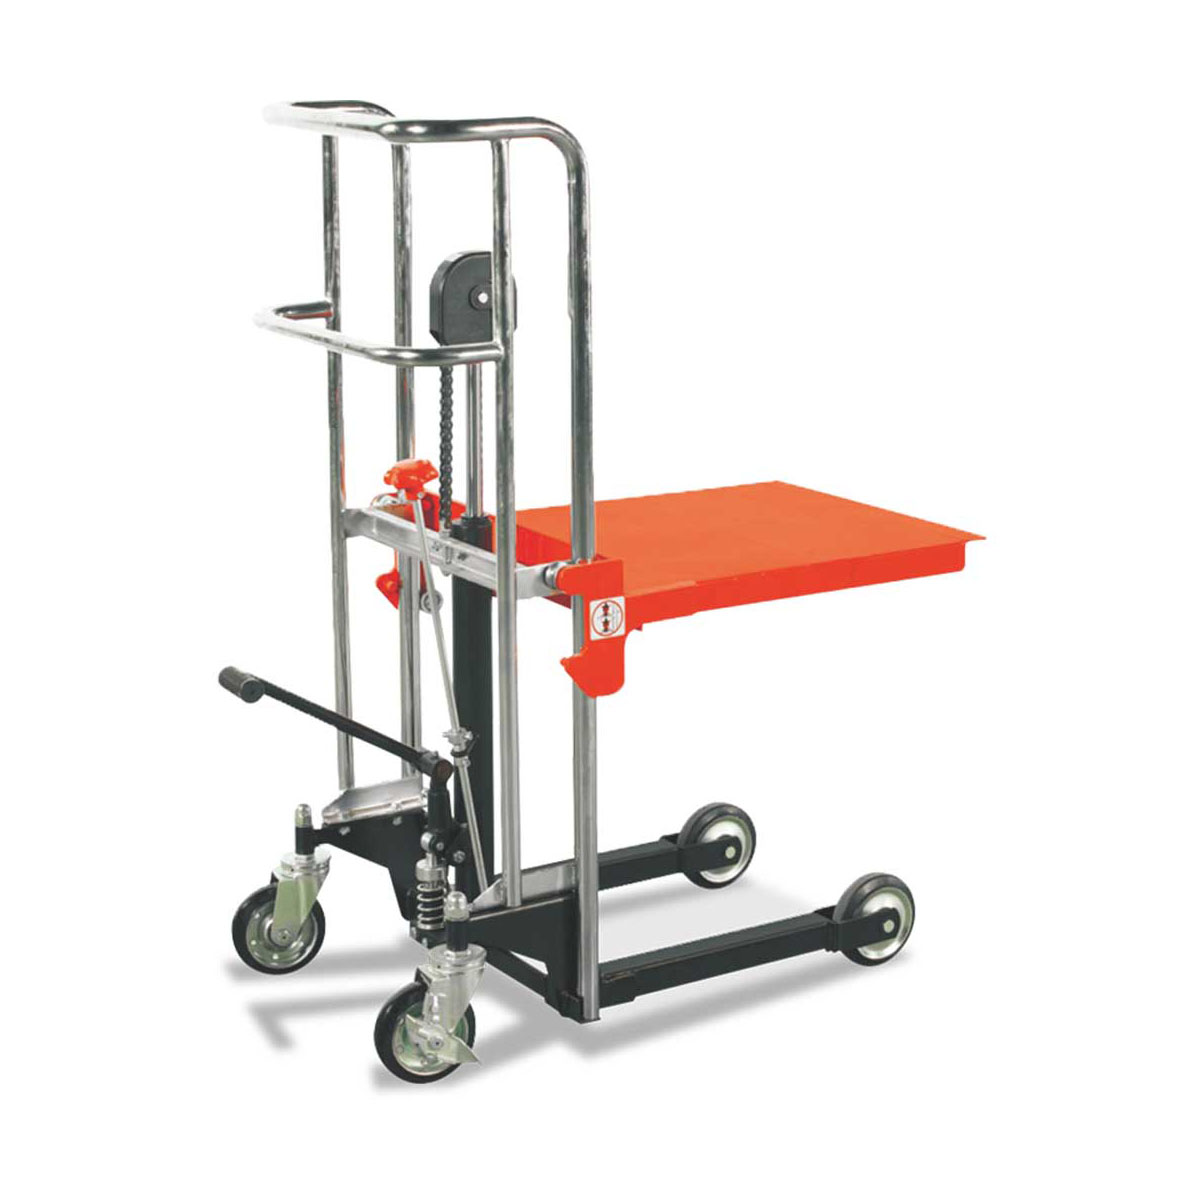 Buy Platform Lifter (Pump) in Utility Lifters | Materials Handling Lift Towers from Astrolift NZ